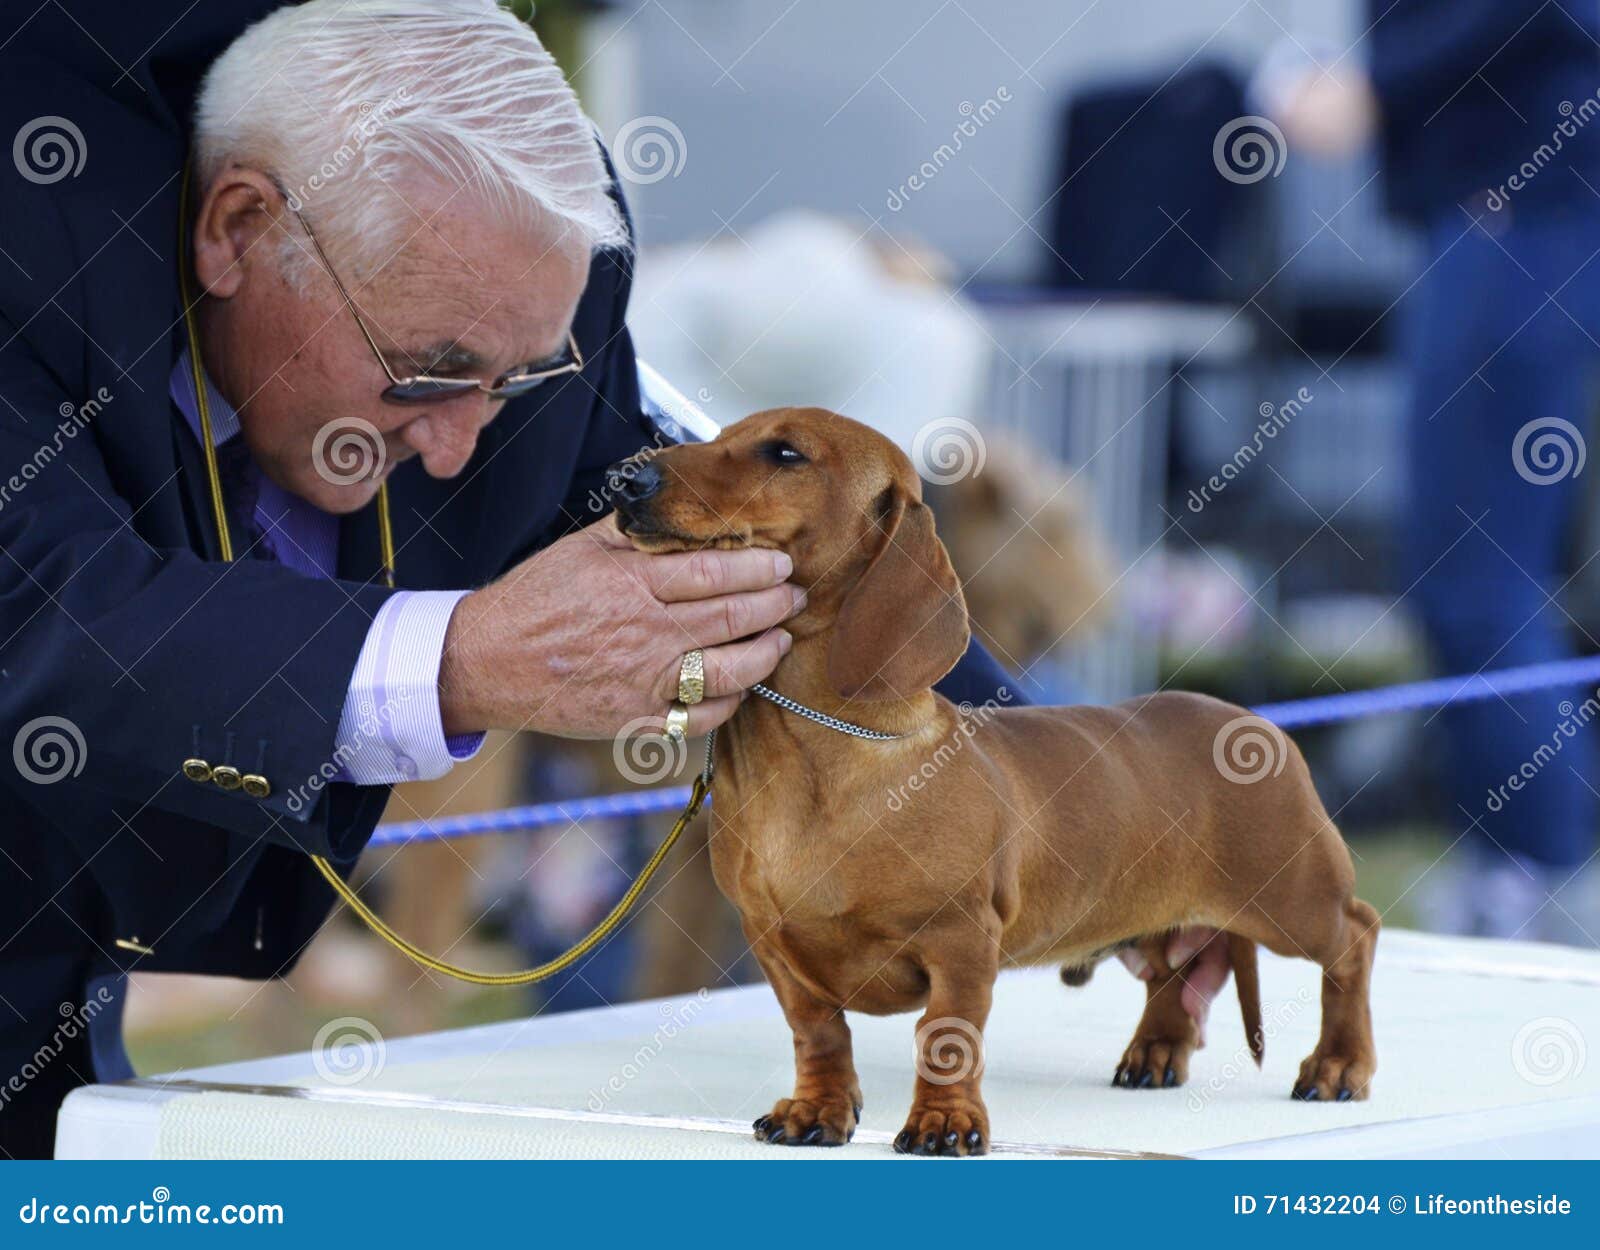 Australian National Kennel Dog Judge Judging Dachshund Pup at Boonah Show Editorial Image - Image of exhibits, ankc: 71432204